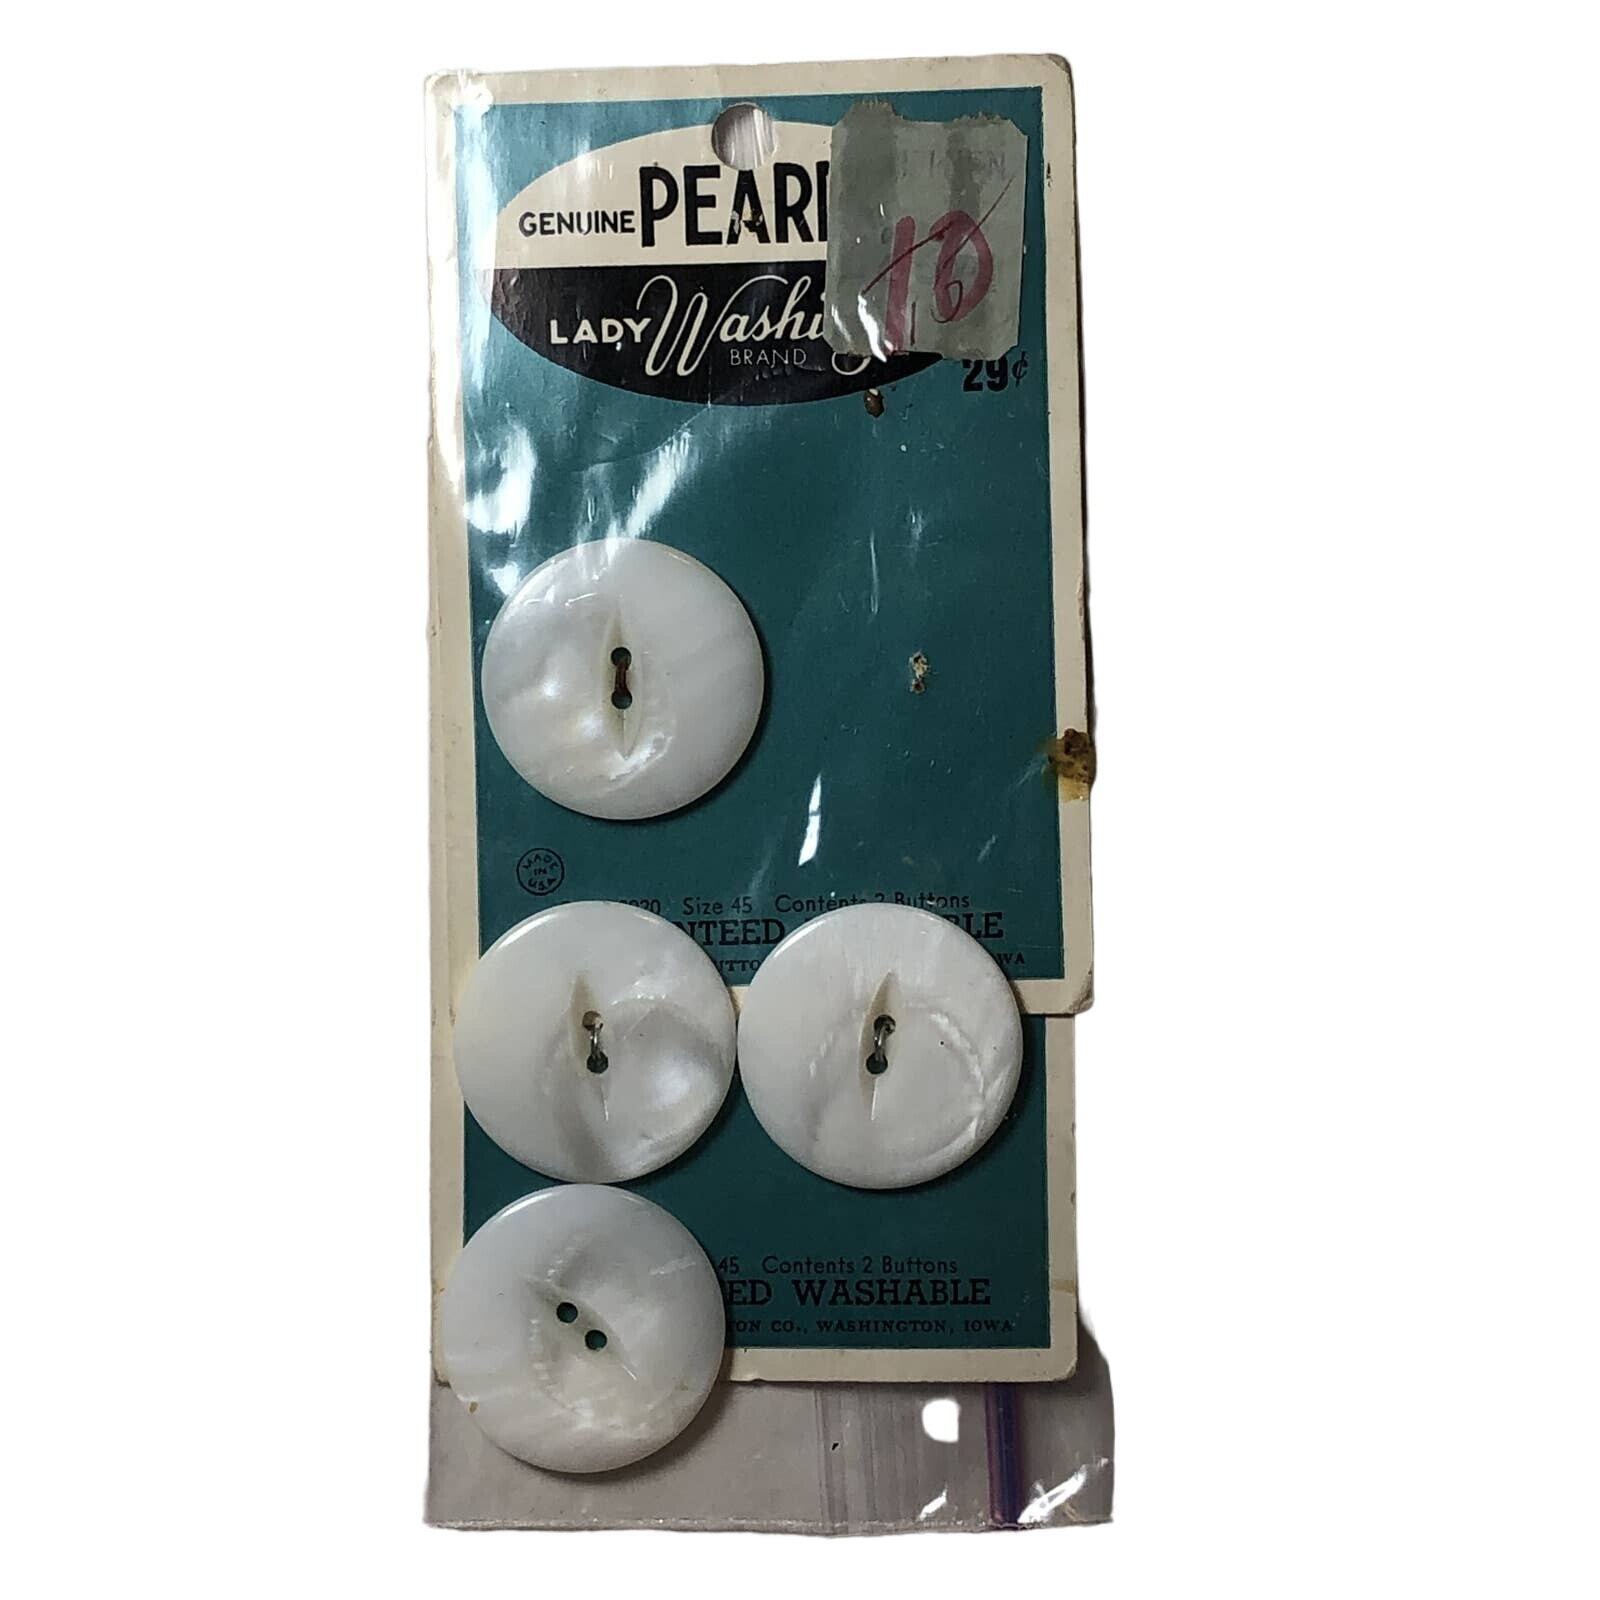 4 Vintage Genuine Pearl Sewing Buttons Lady Washington 1 1/8\